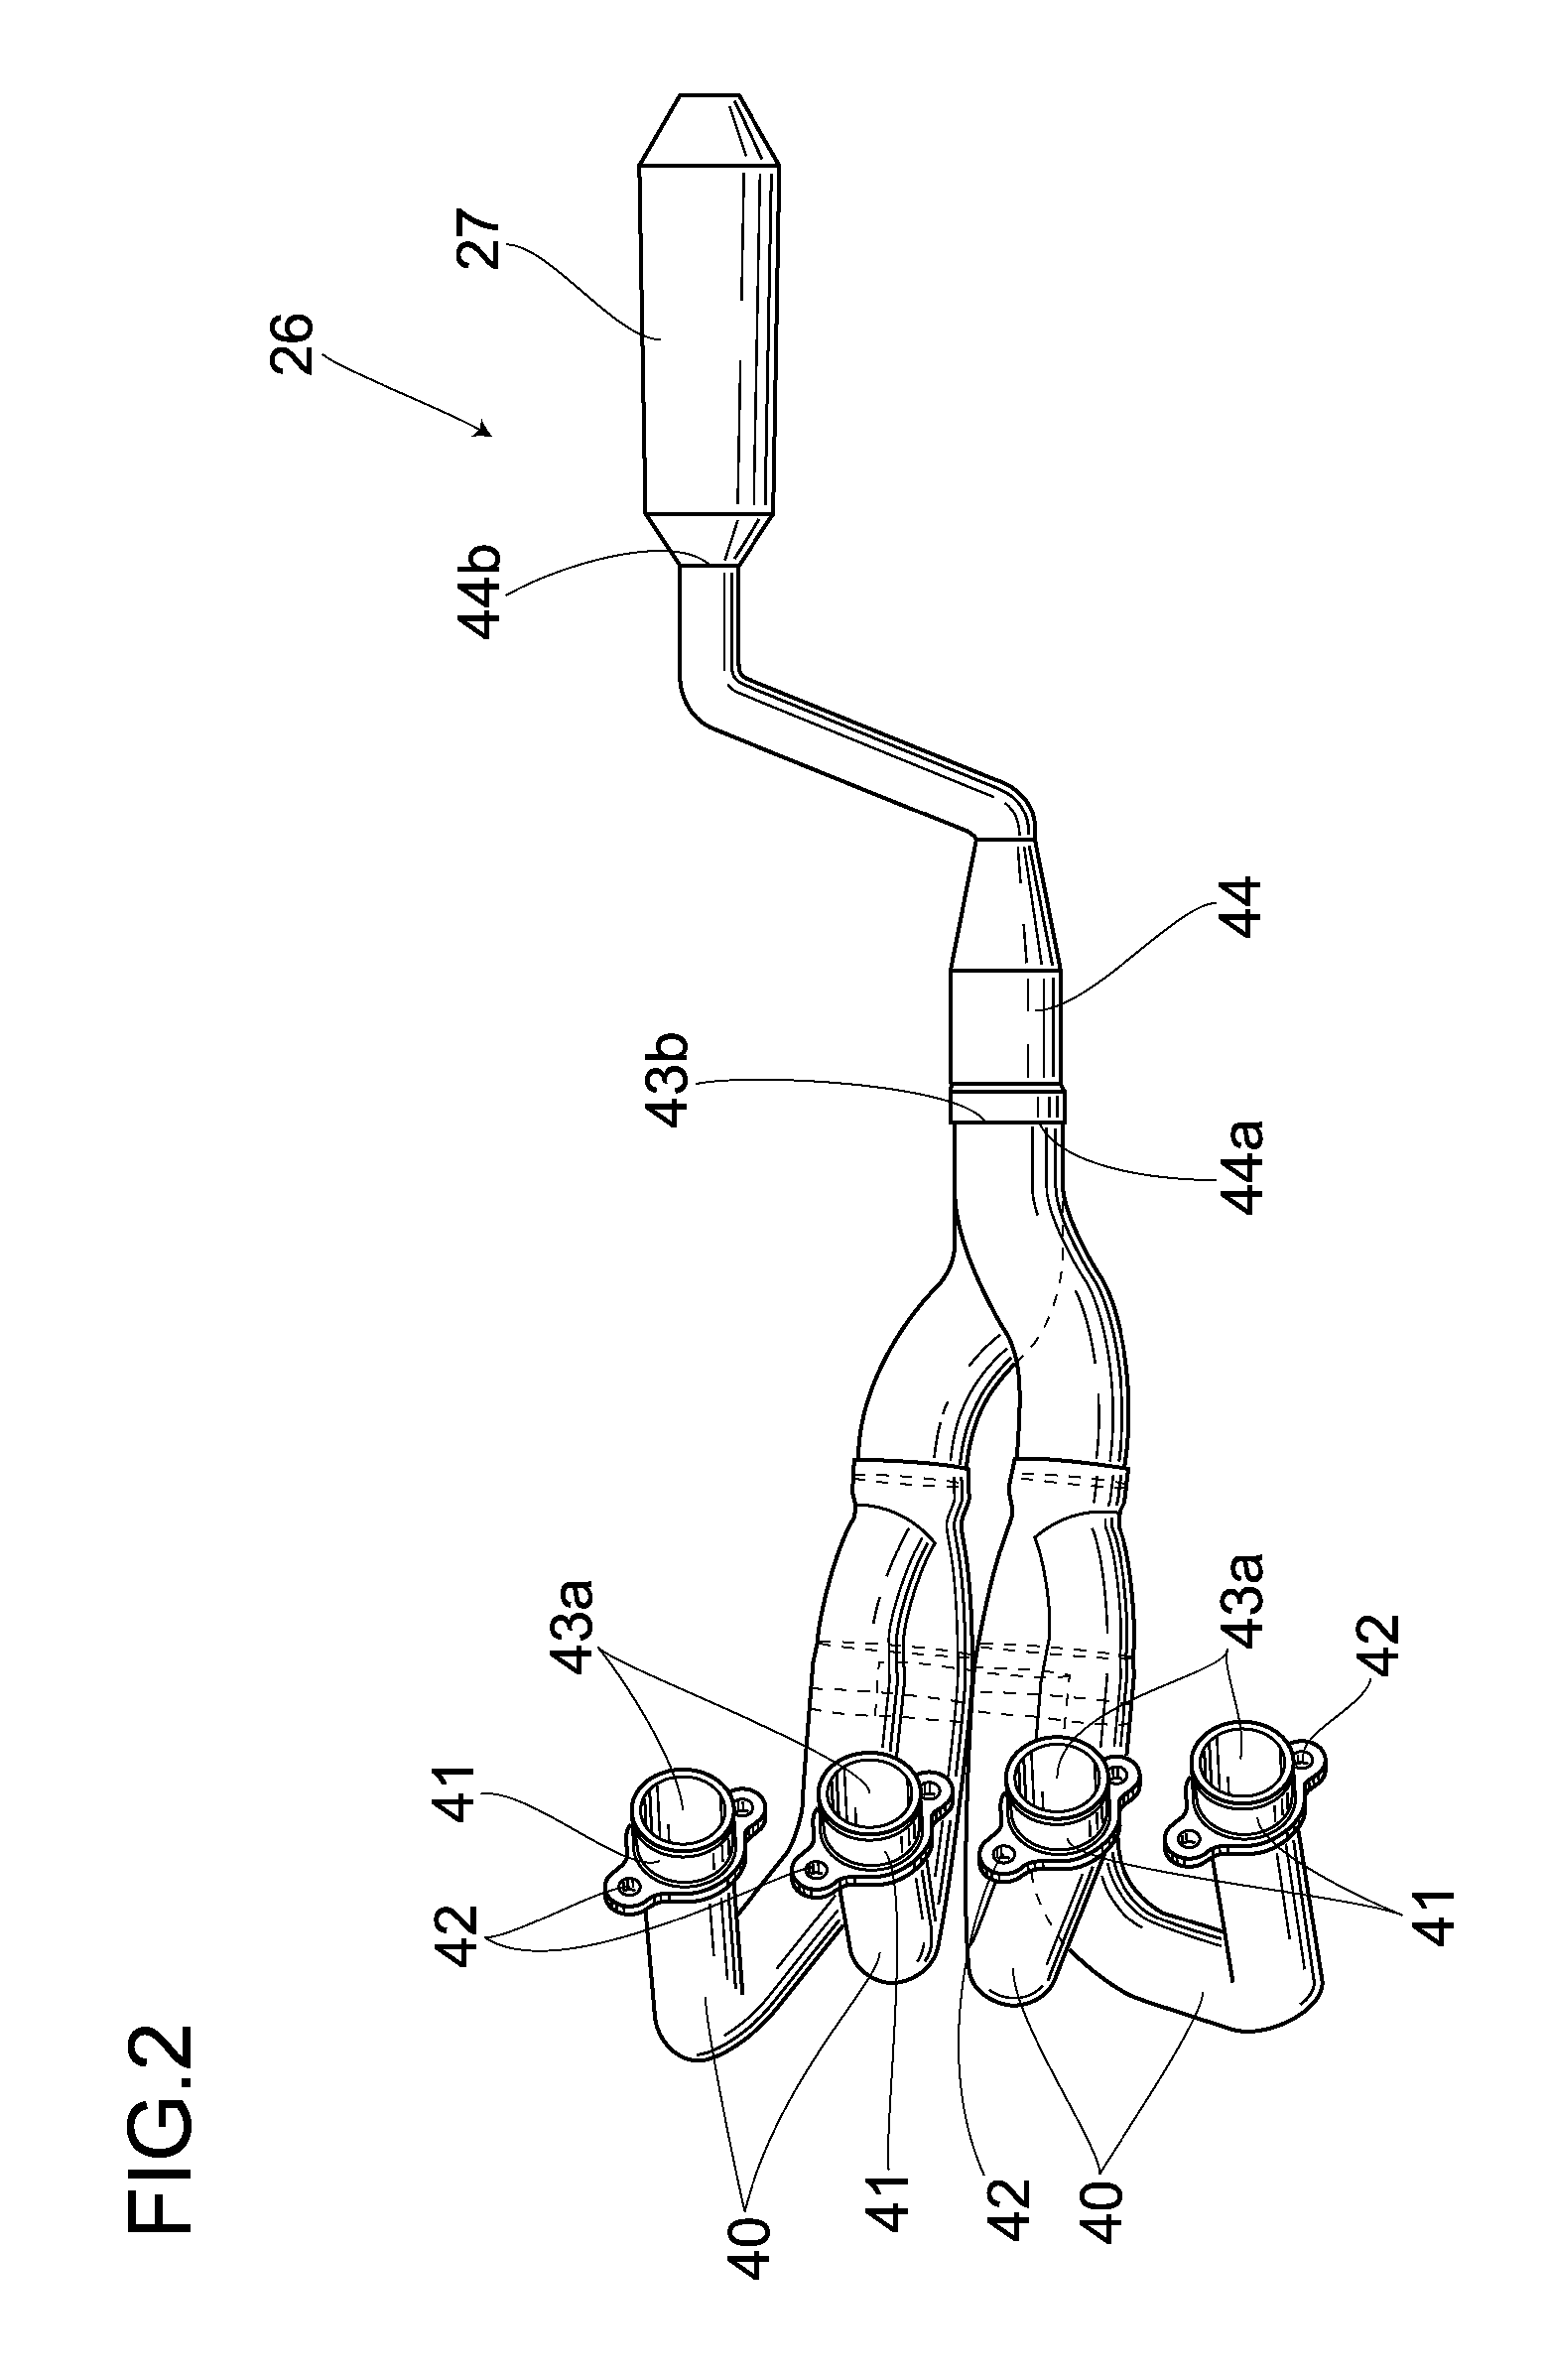 Method and apparatus for manufacturing for fixing a mounting ring to an exhaust pipe assembly